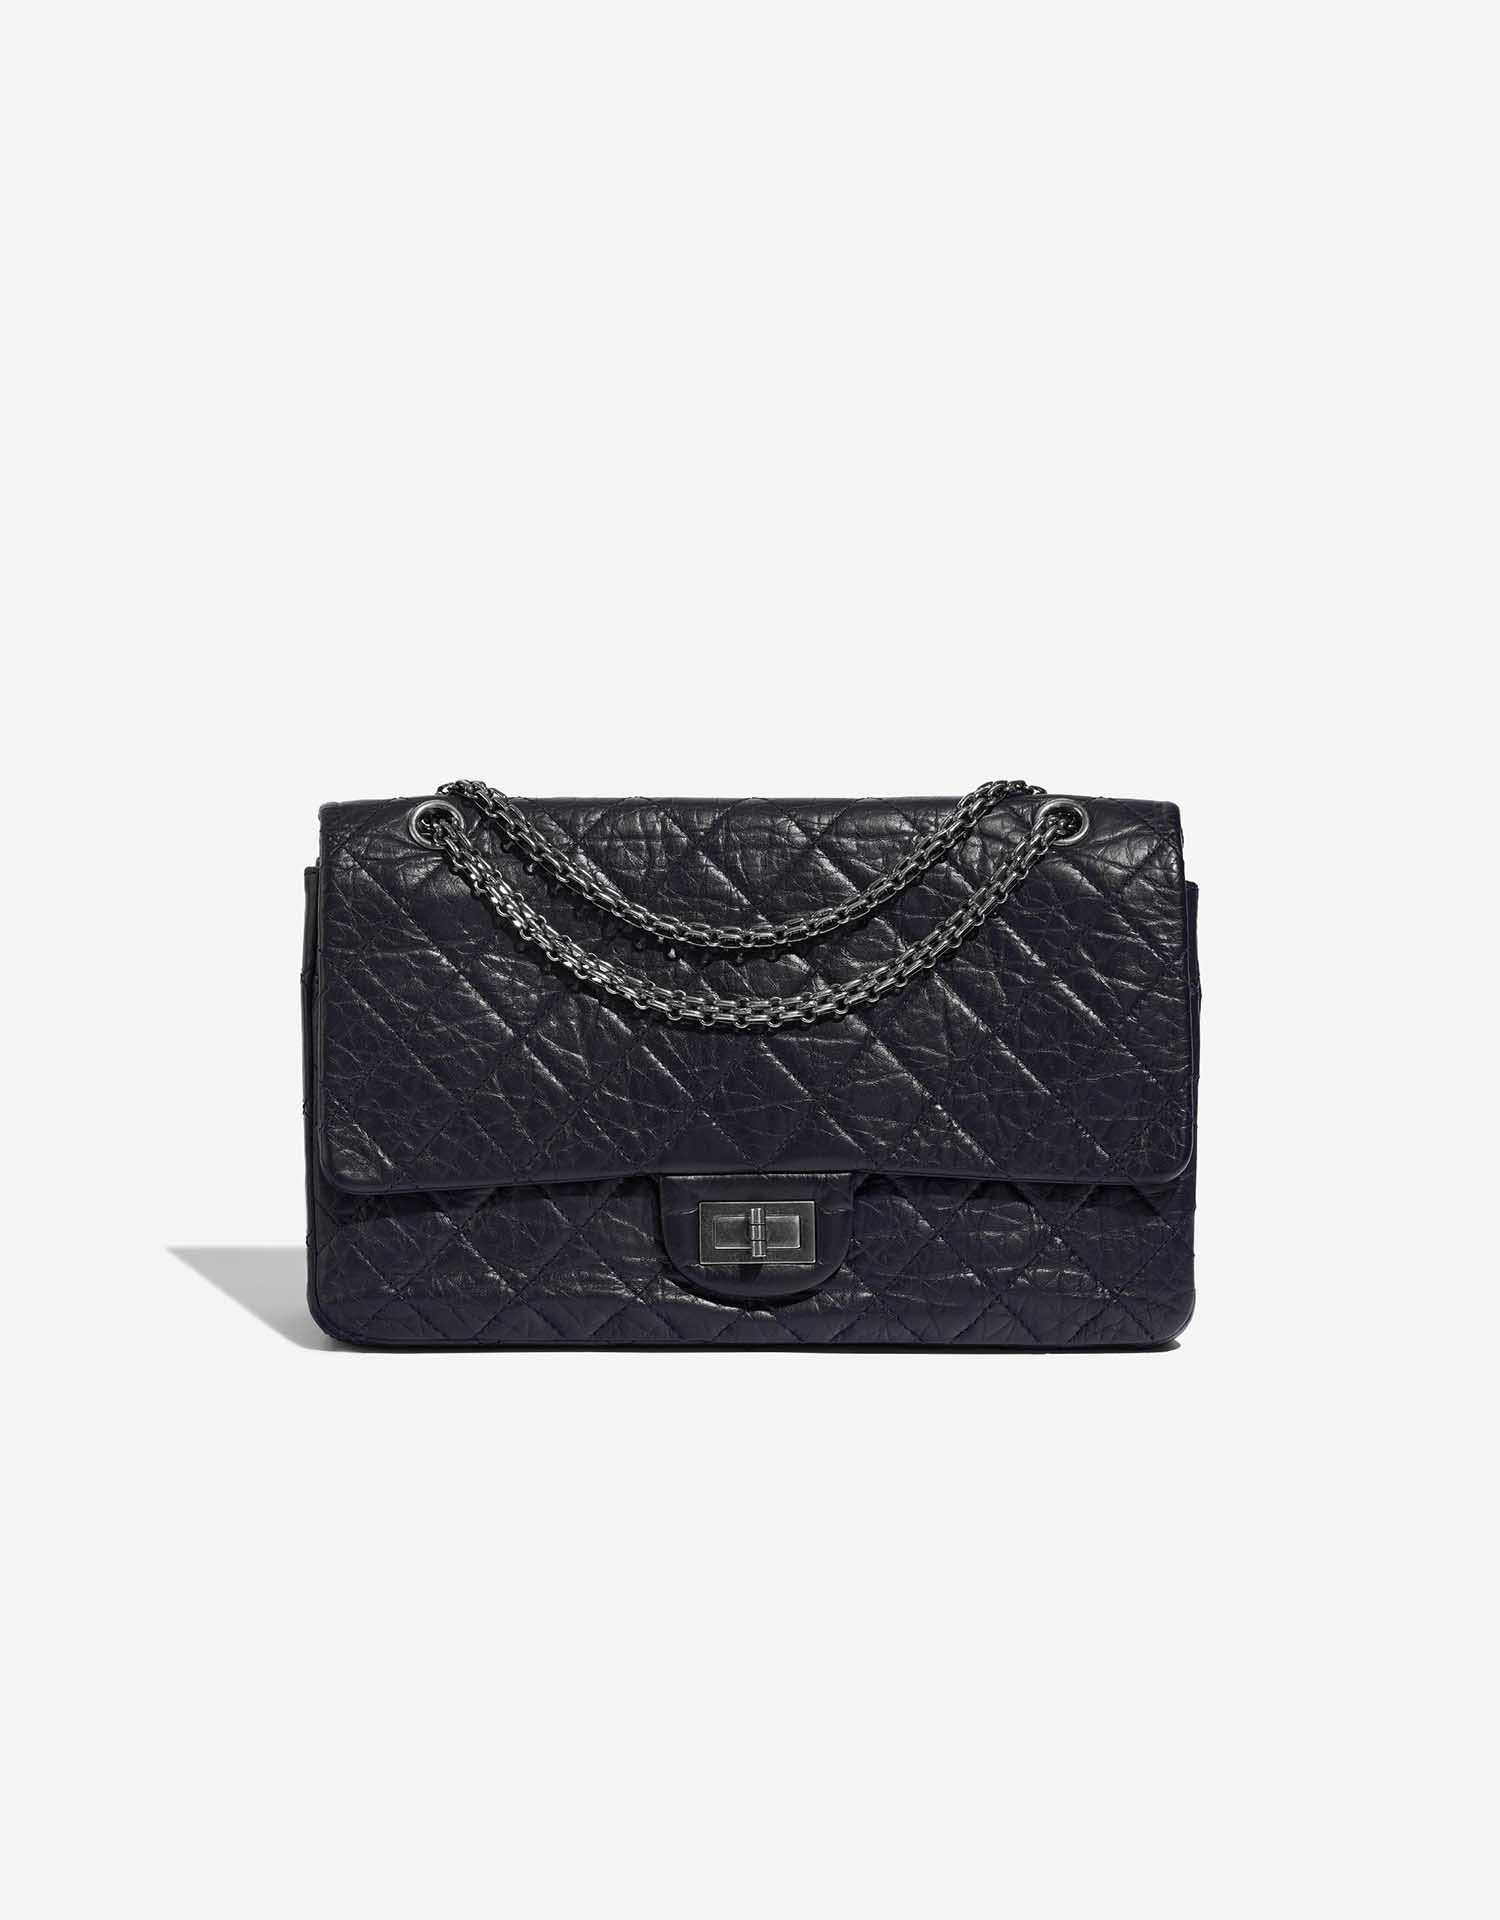 CHANEL Metallic Aged Calfskin Quilted Reissue 2.55 Accordion Flap Black  1275152